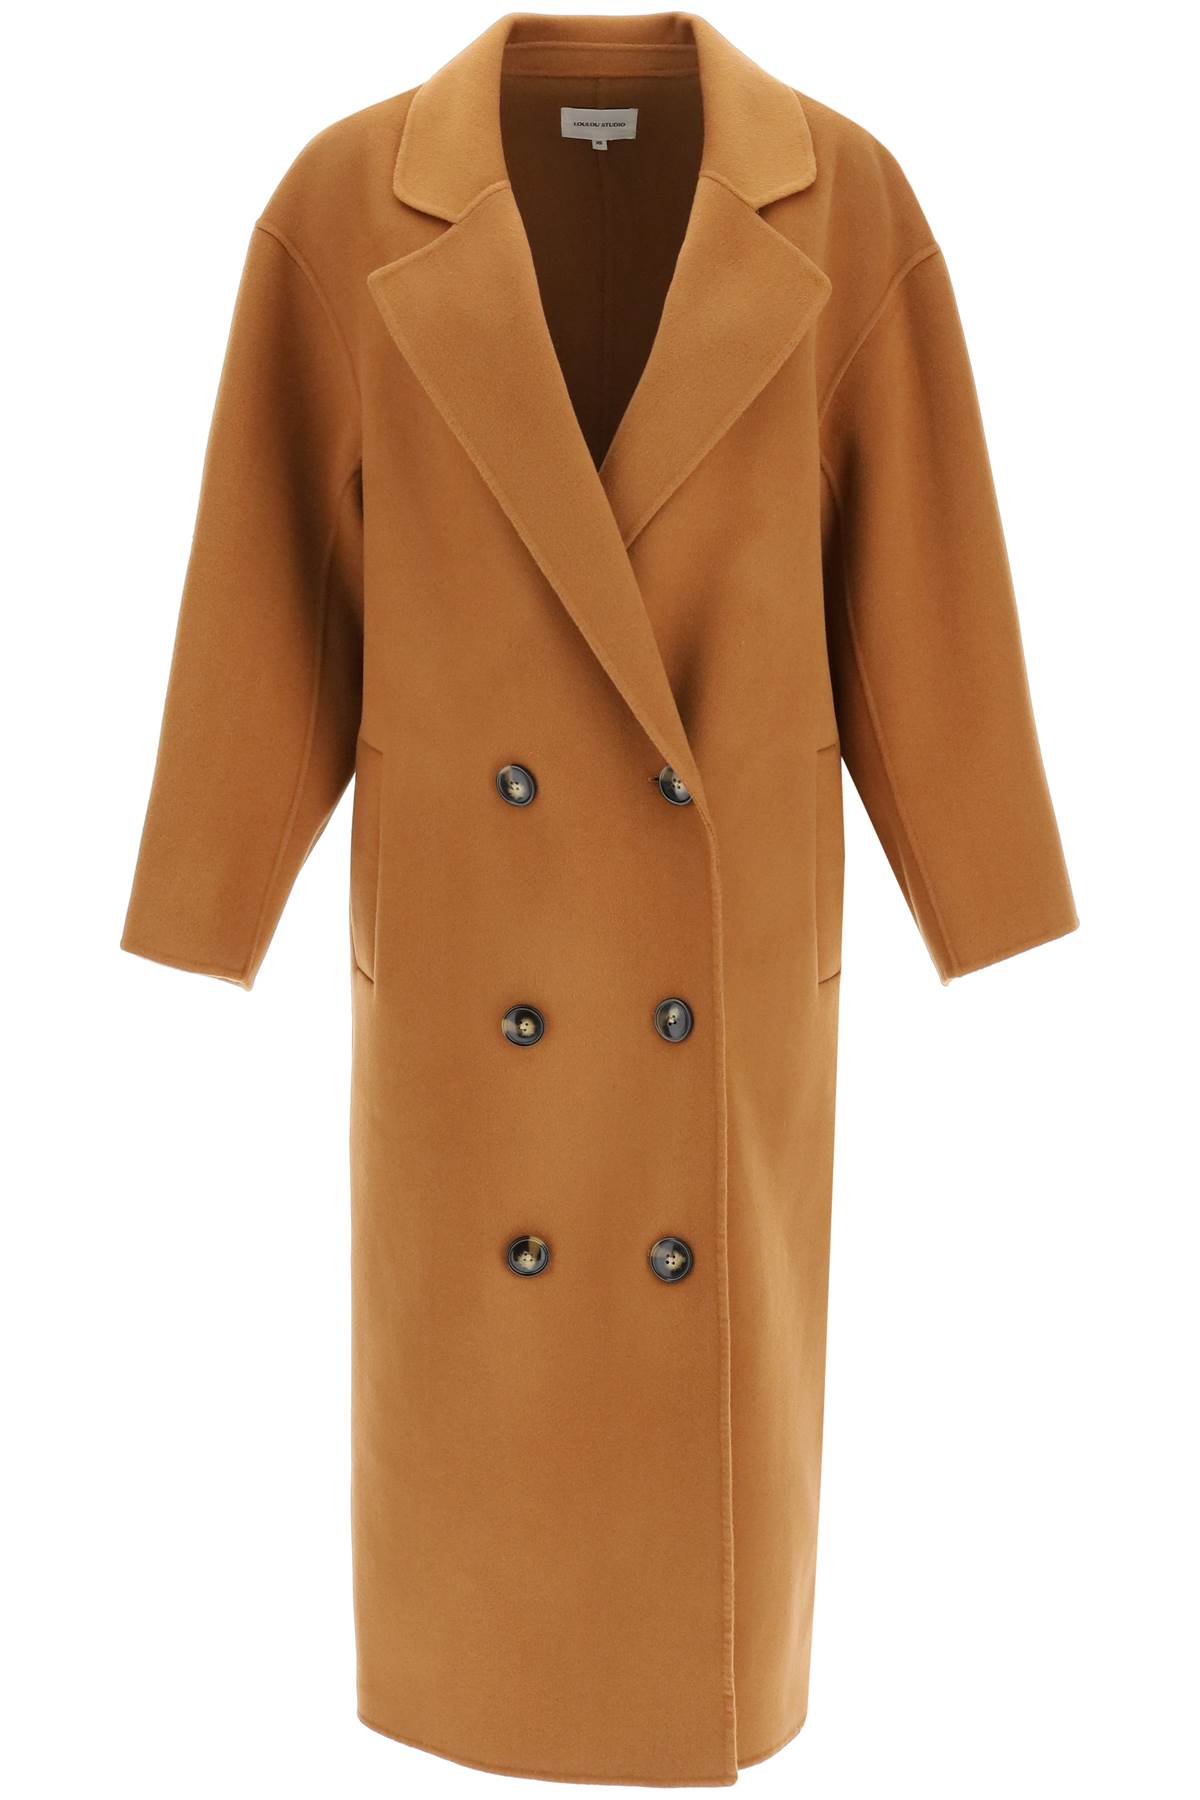 Loulou Studio borneo Double-breasted Wool And Cashmere Coat